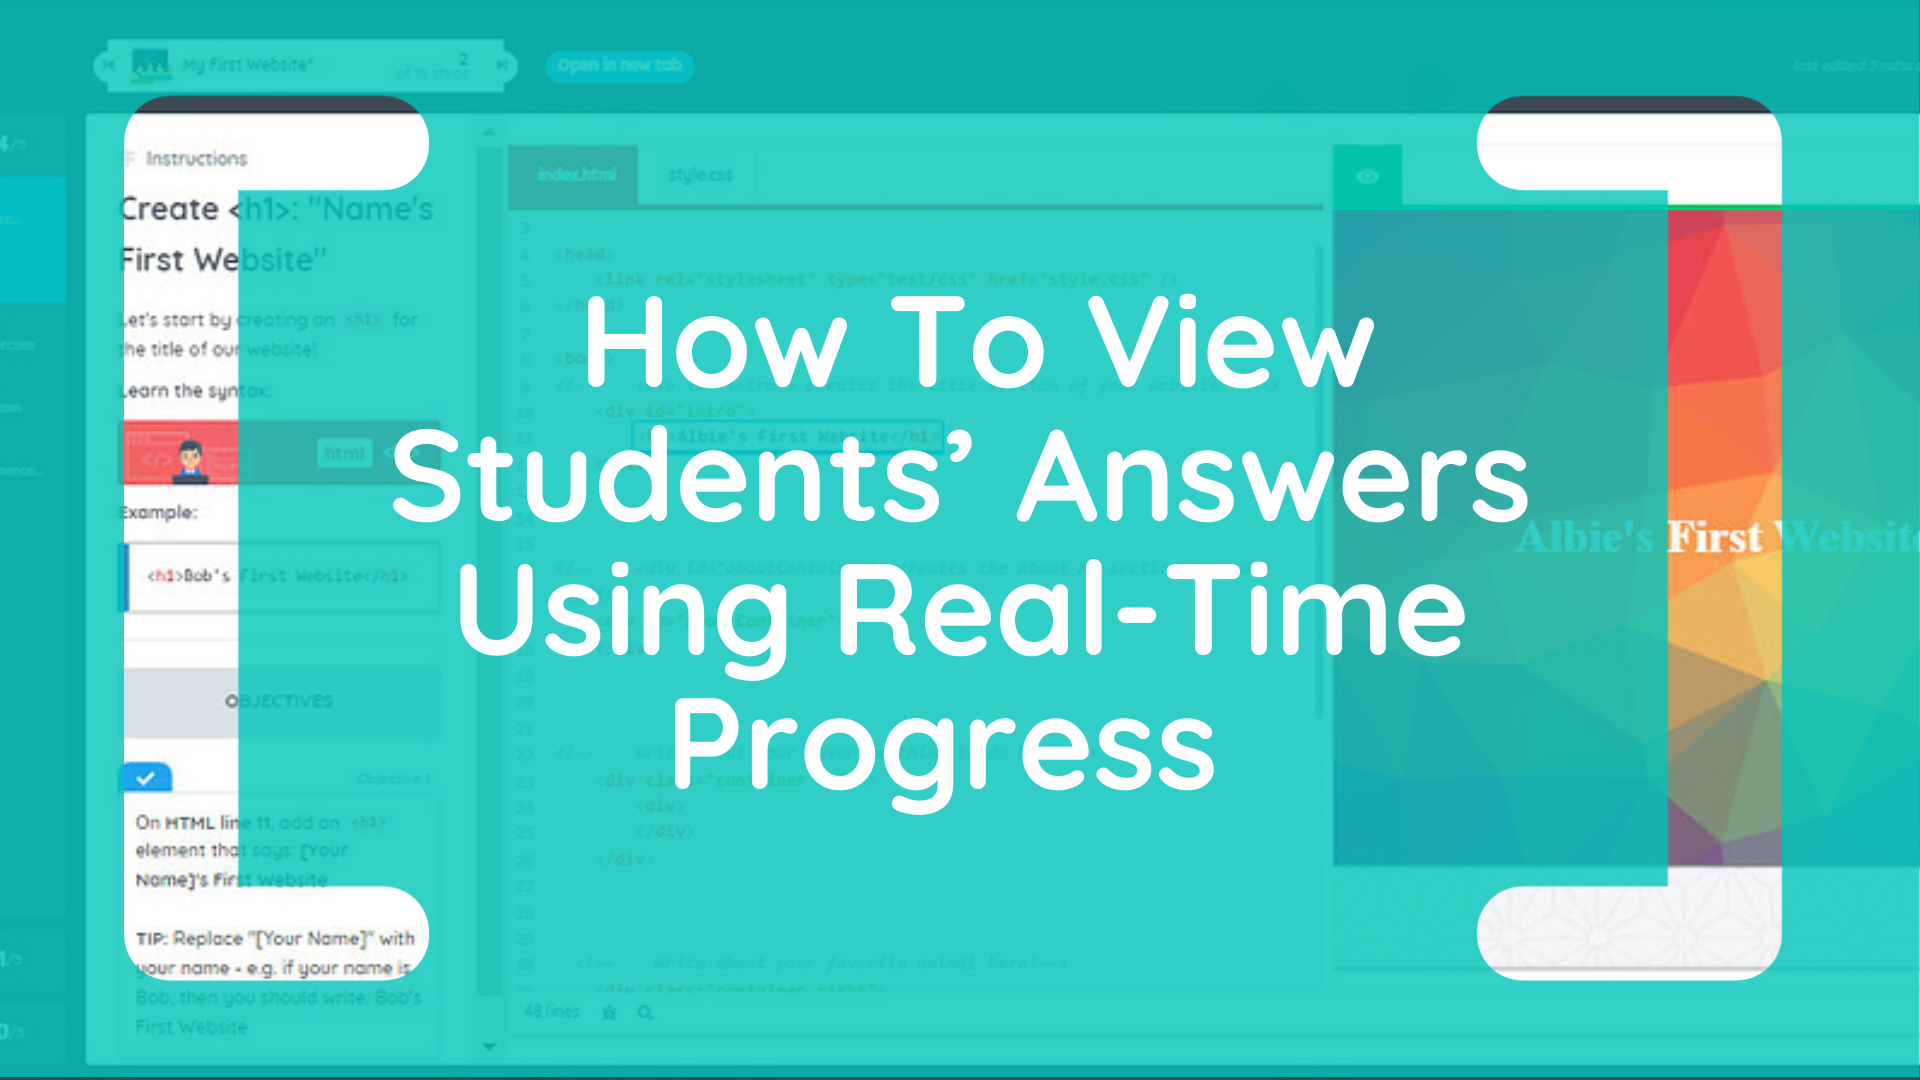 How To View Students’ Answers Using Real-Time Progress